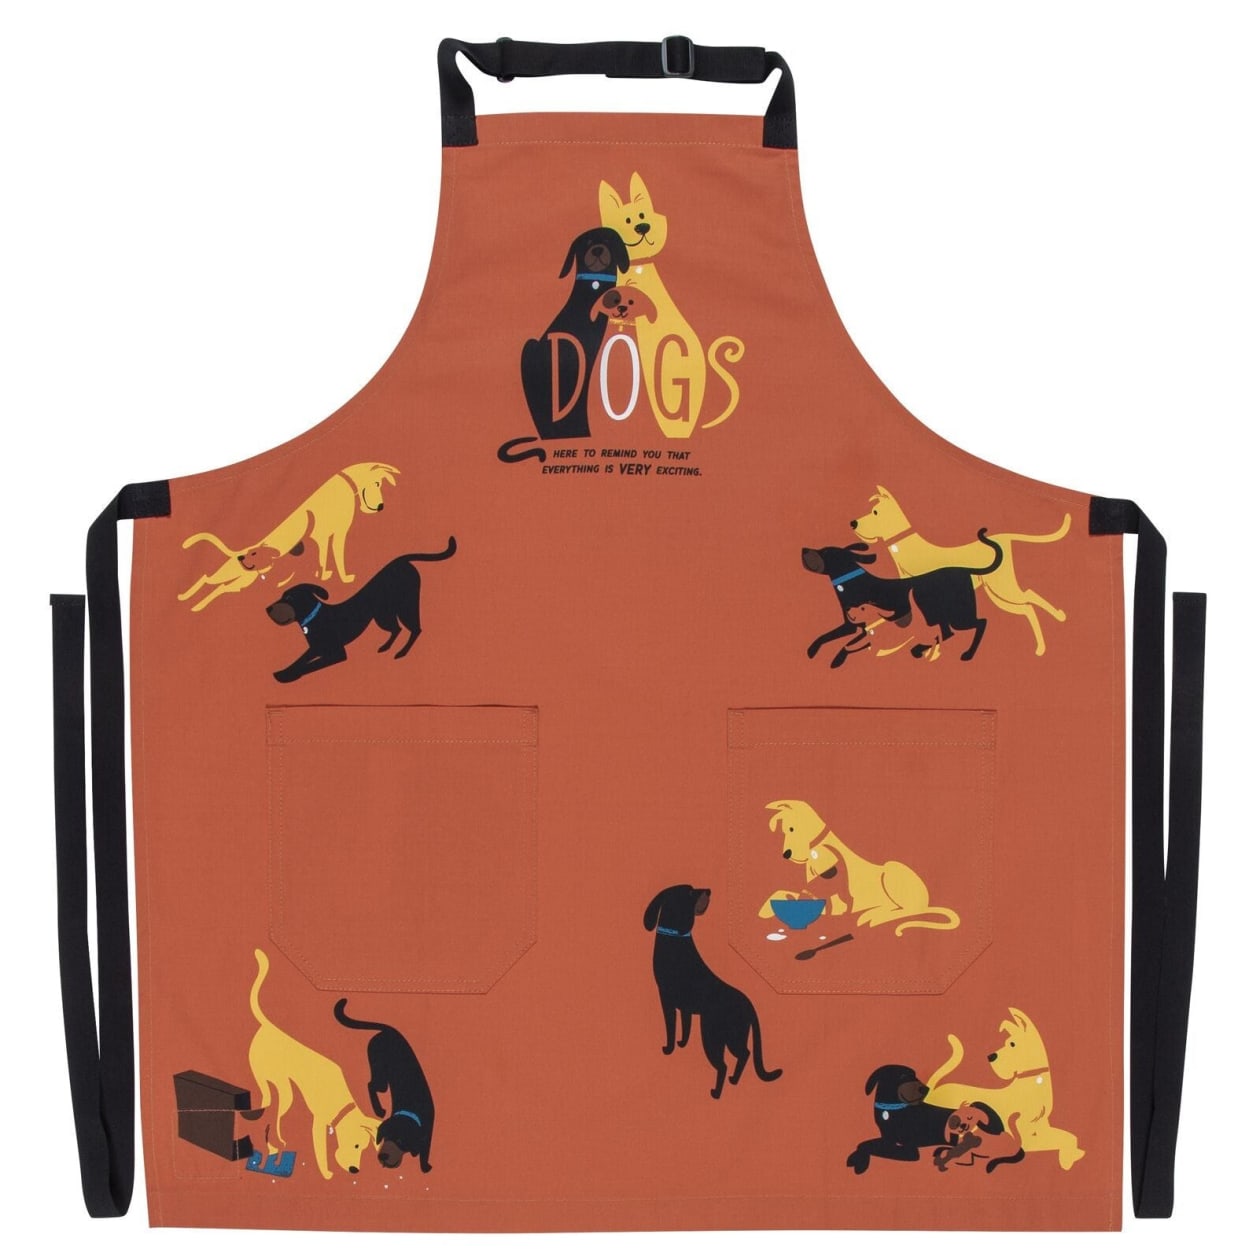 Dogs. Here To Remind You That Everything Is Exciting Funny Cooking and BBQ Apron Unisex 2 Pockets Adjustable Strap 100% Cotton | BlueQ at GetBullish